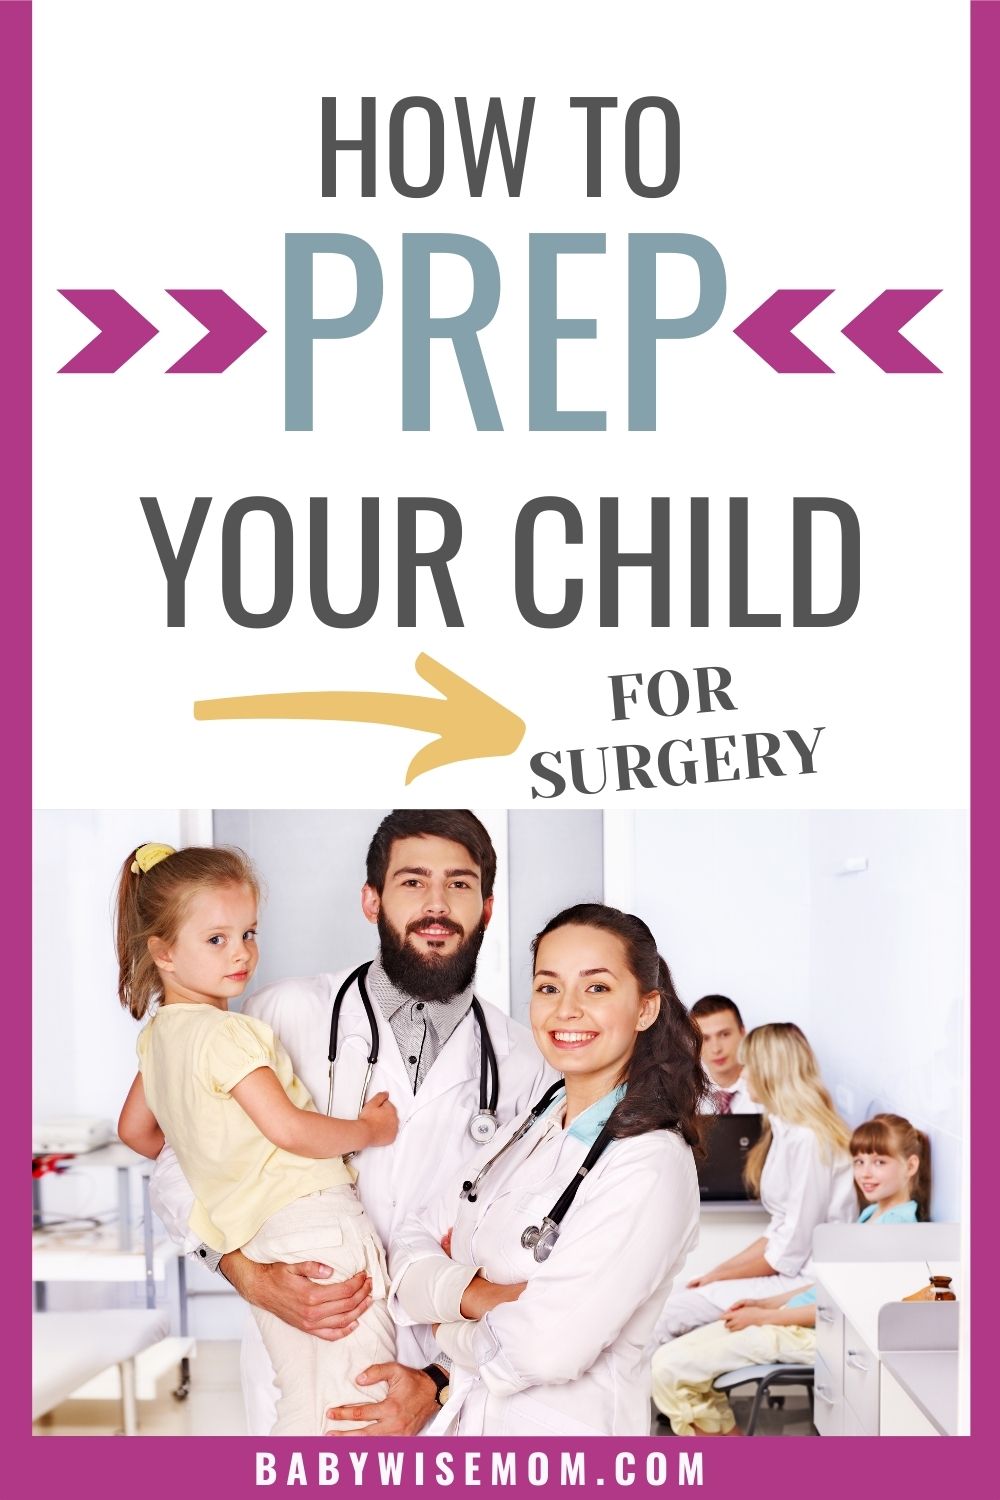 How to prep your child for surgery